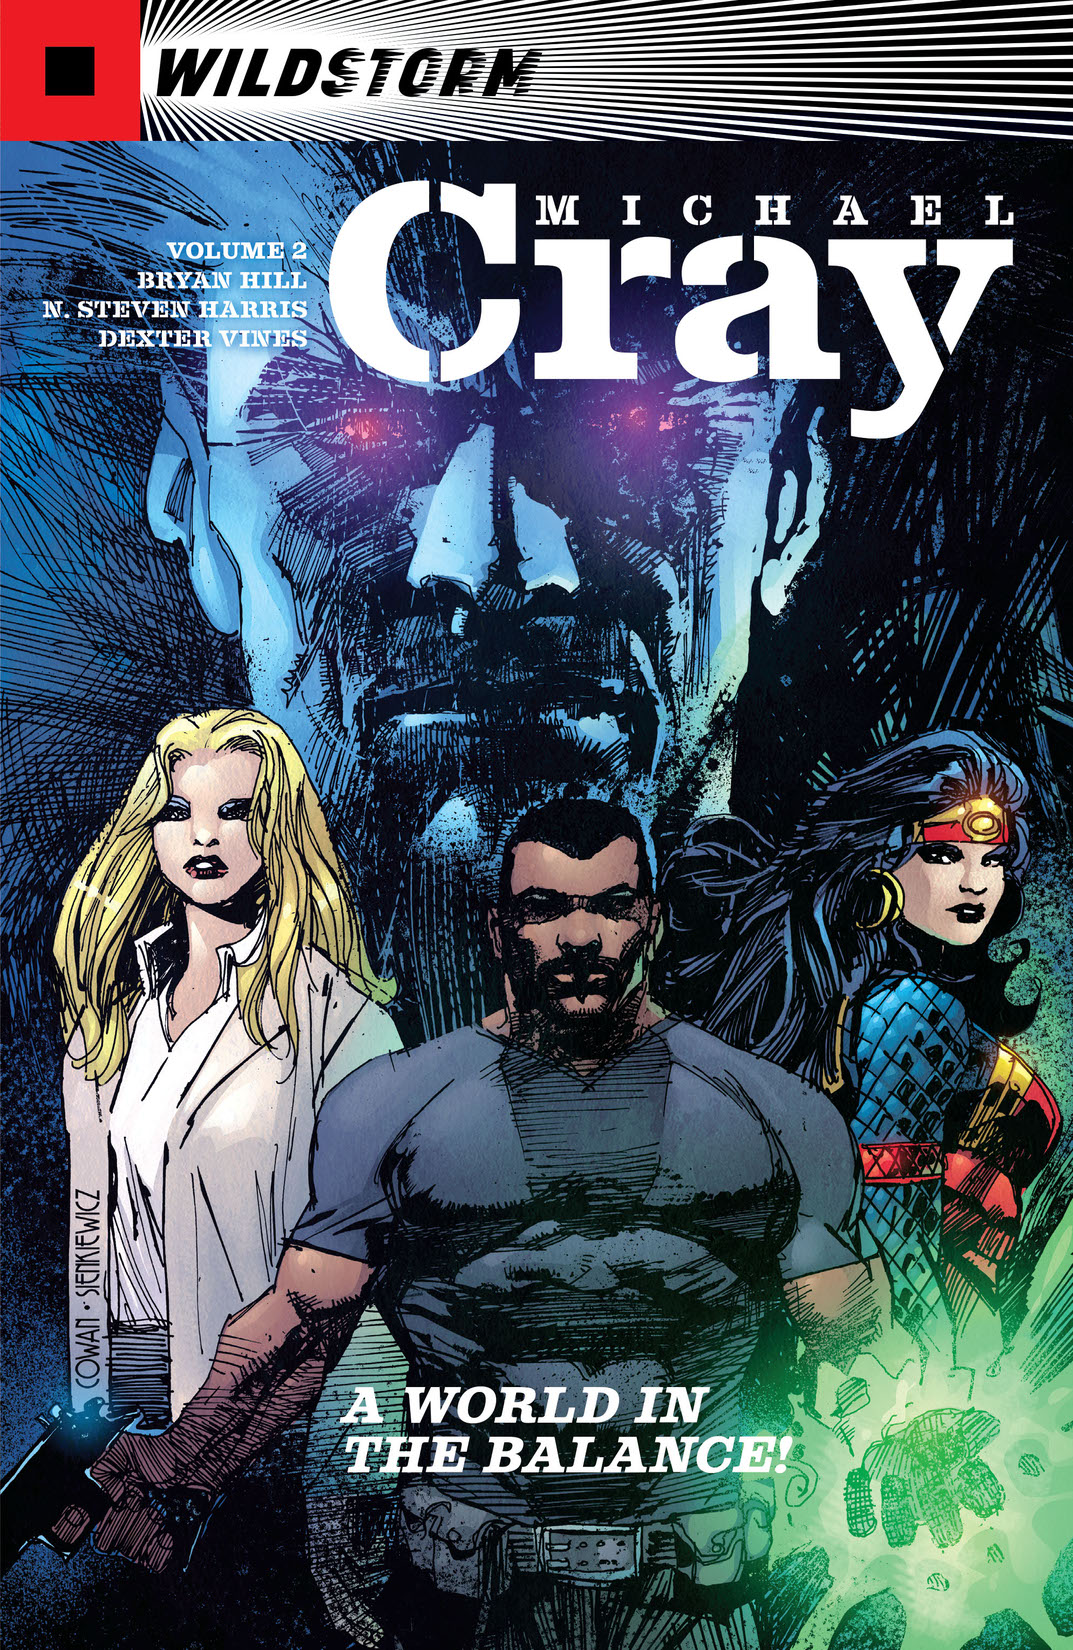 The Wild Storm: Michael Cray Vol. 2 preview images